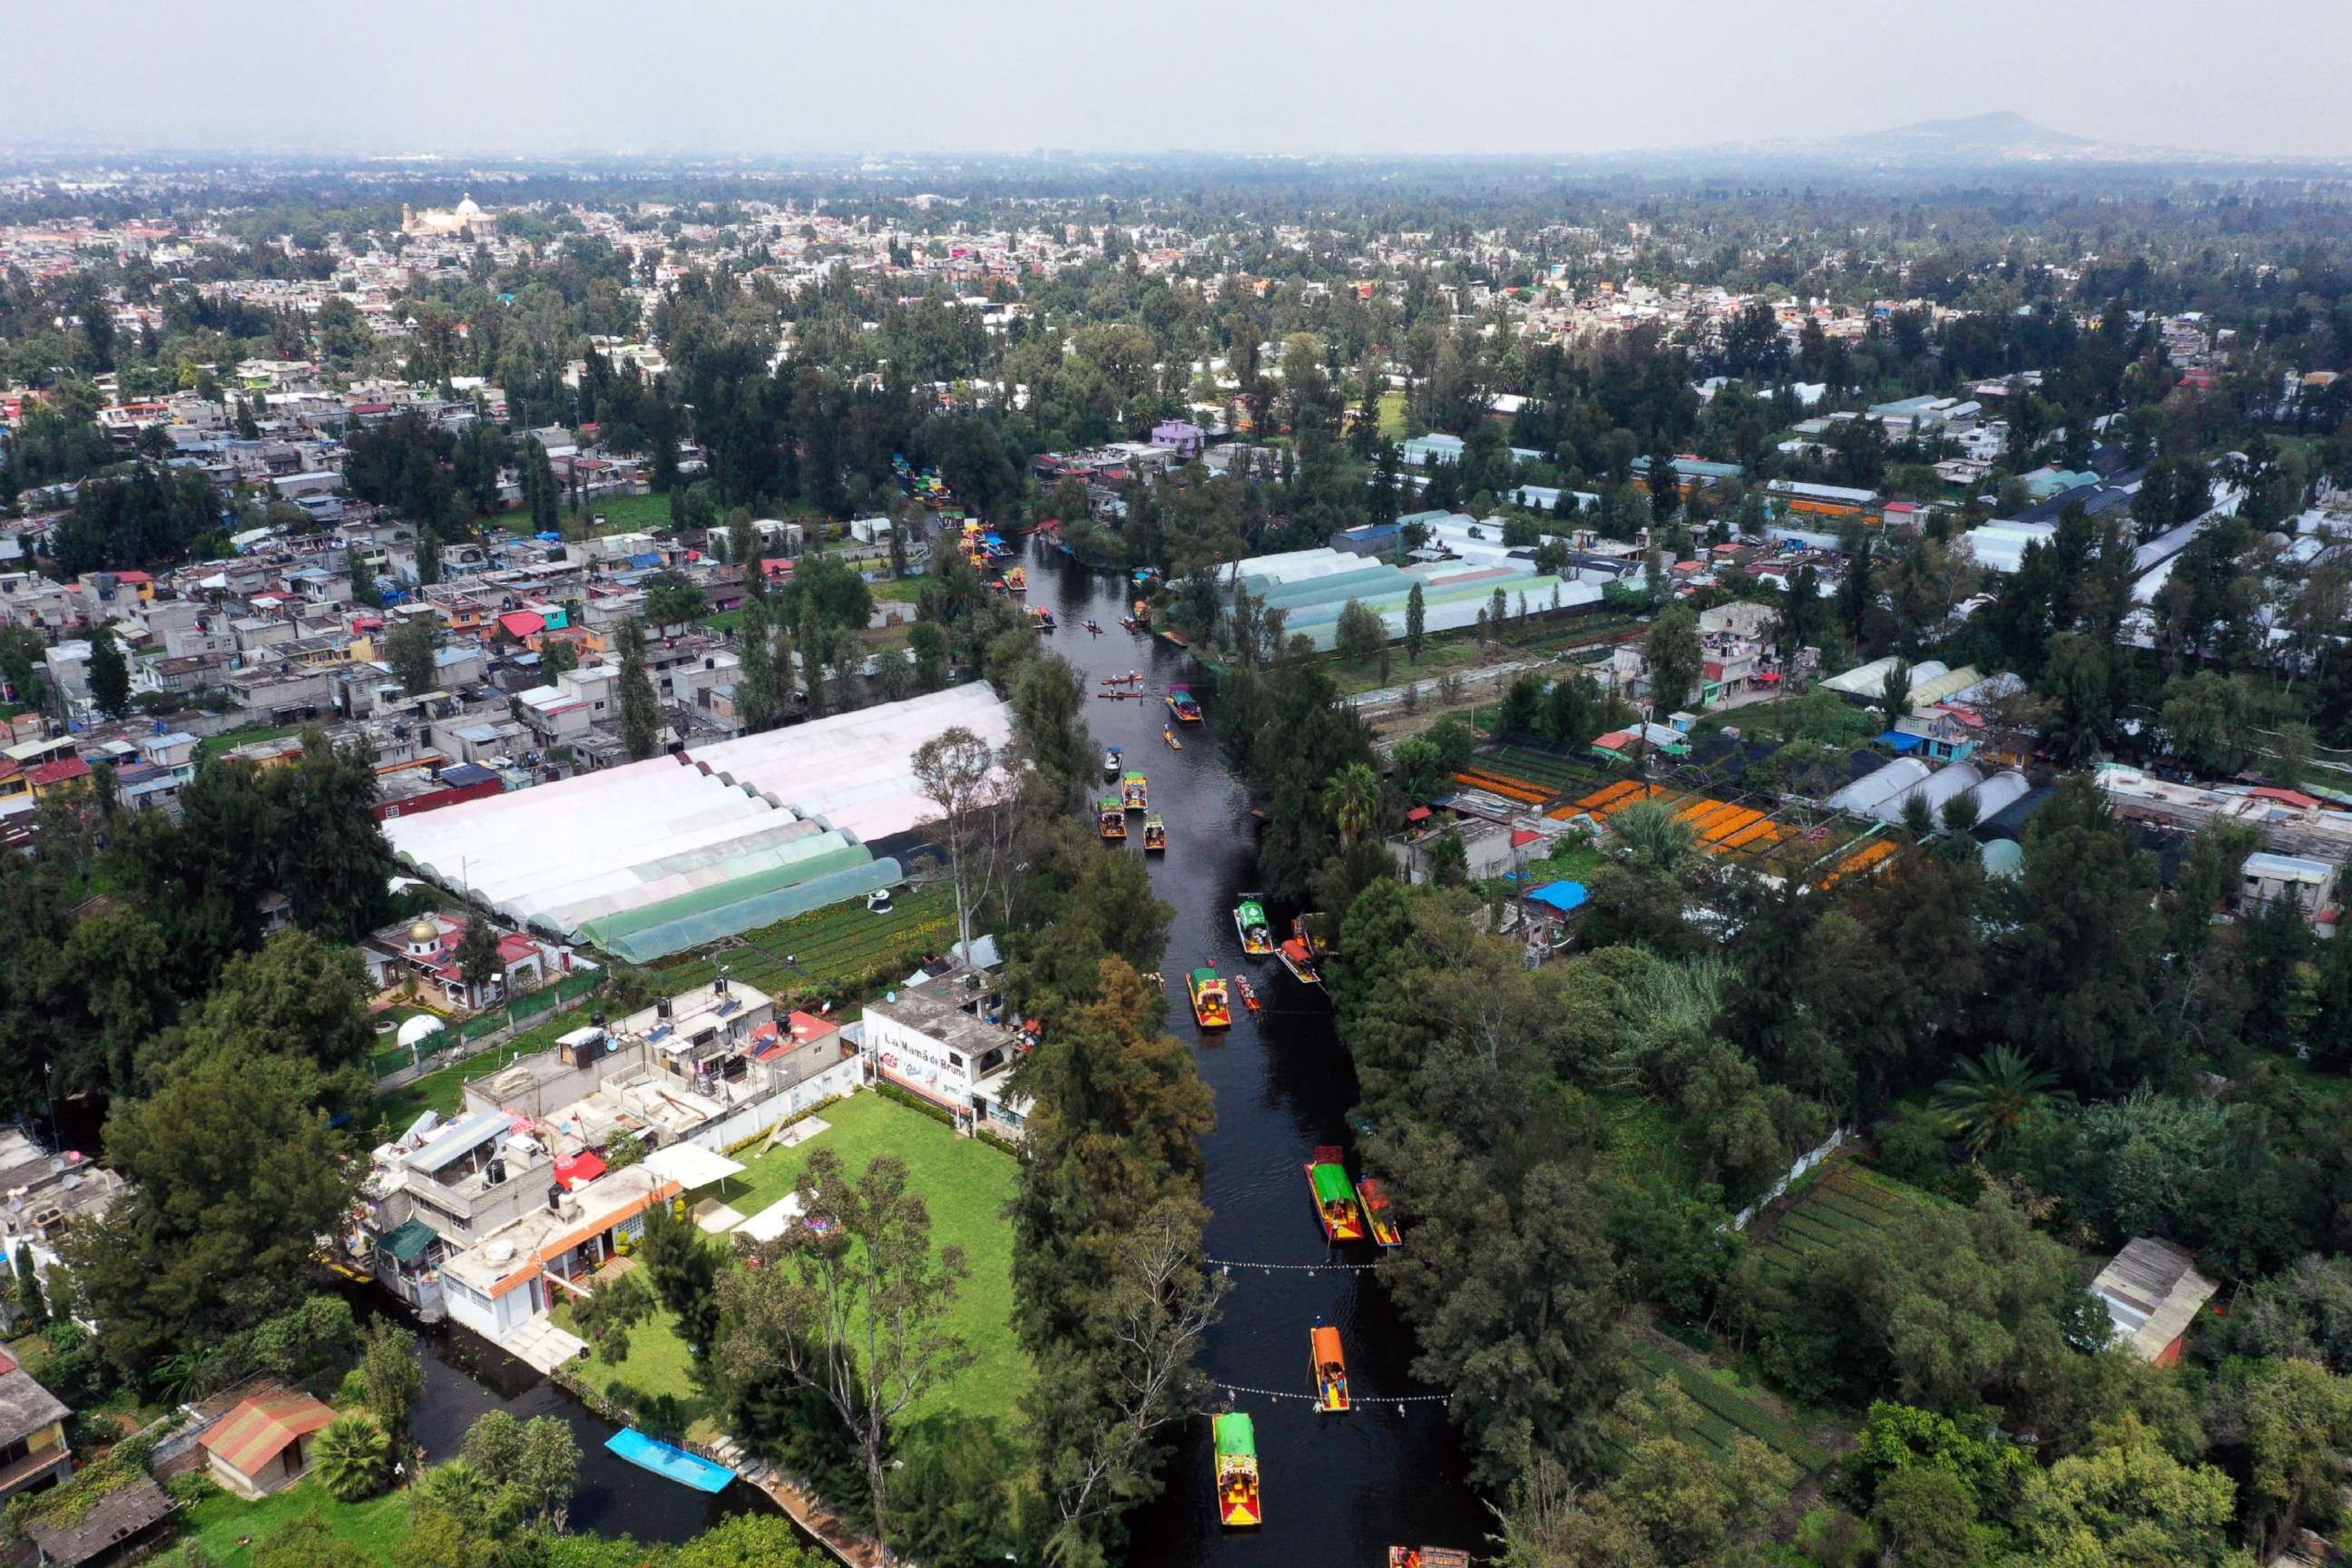 PHOTO: Aerial view of 'Trajineras' in Xochimilco, Mexico City, on Oct. 5, 2019. - Xochimilco, a network of canals and floating gardens that is one of Mexico City's top tourist attractions.